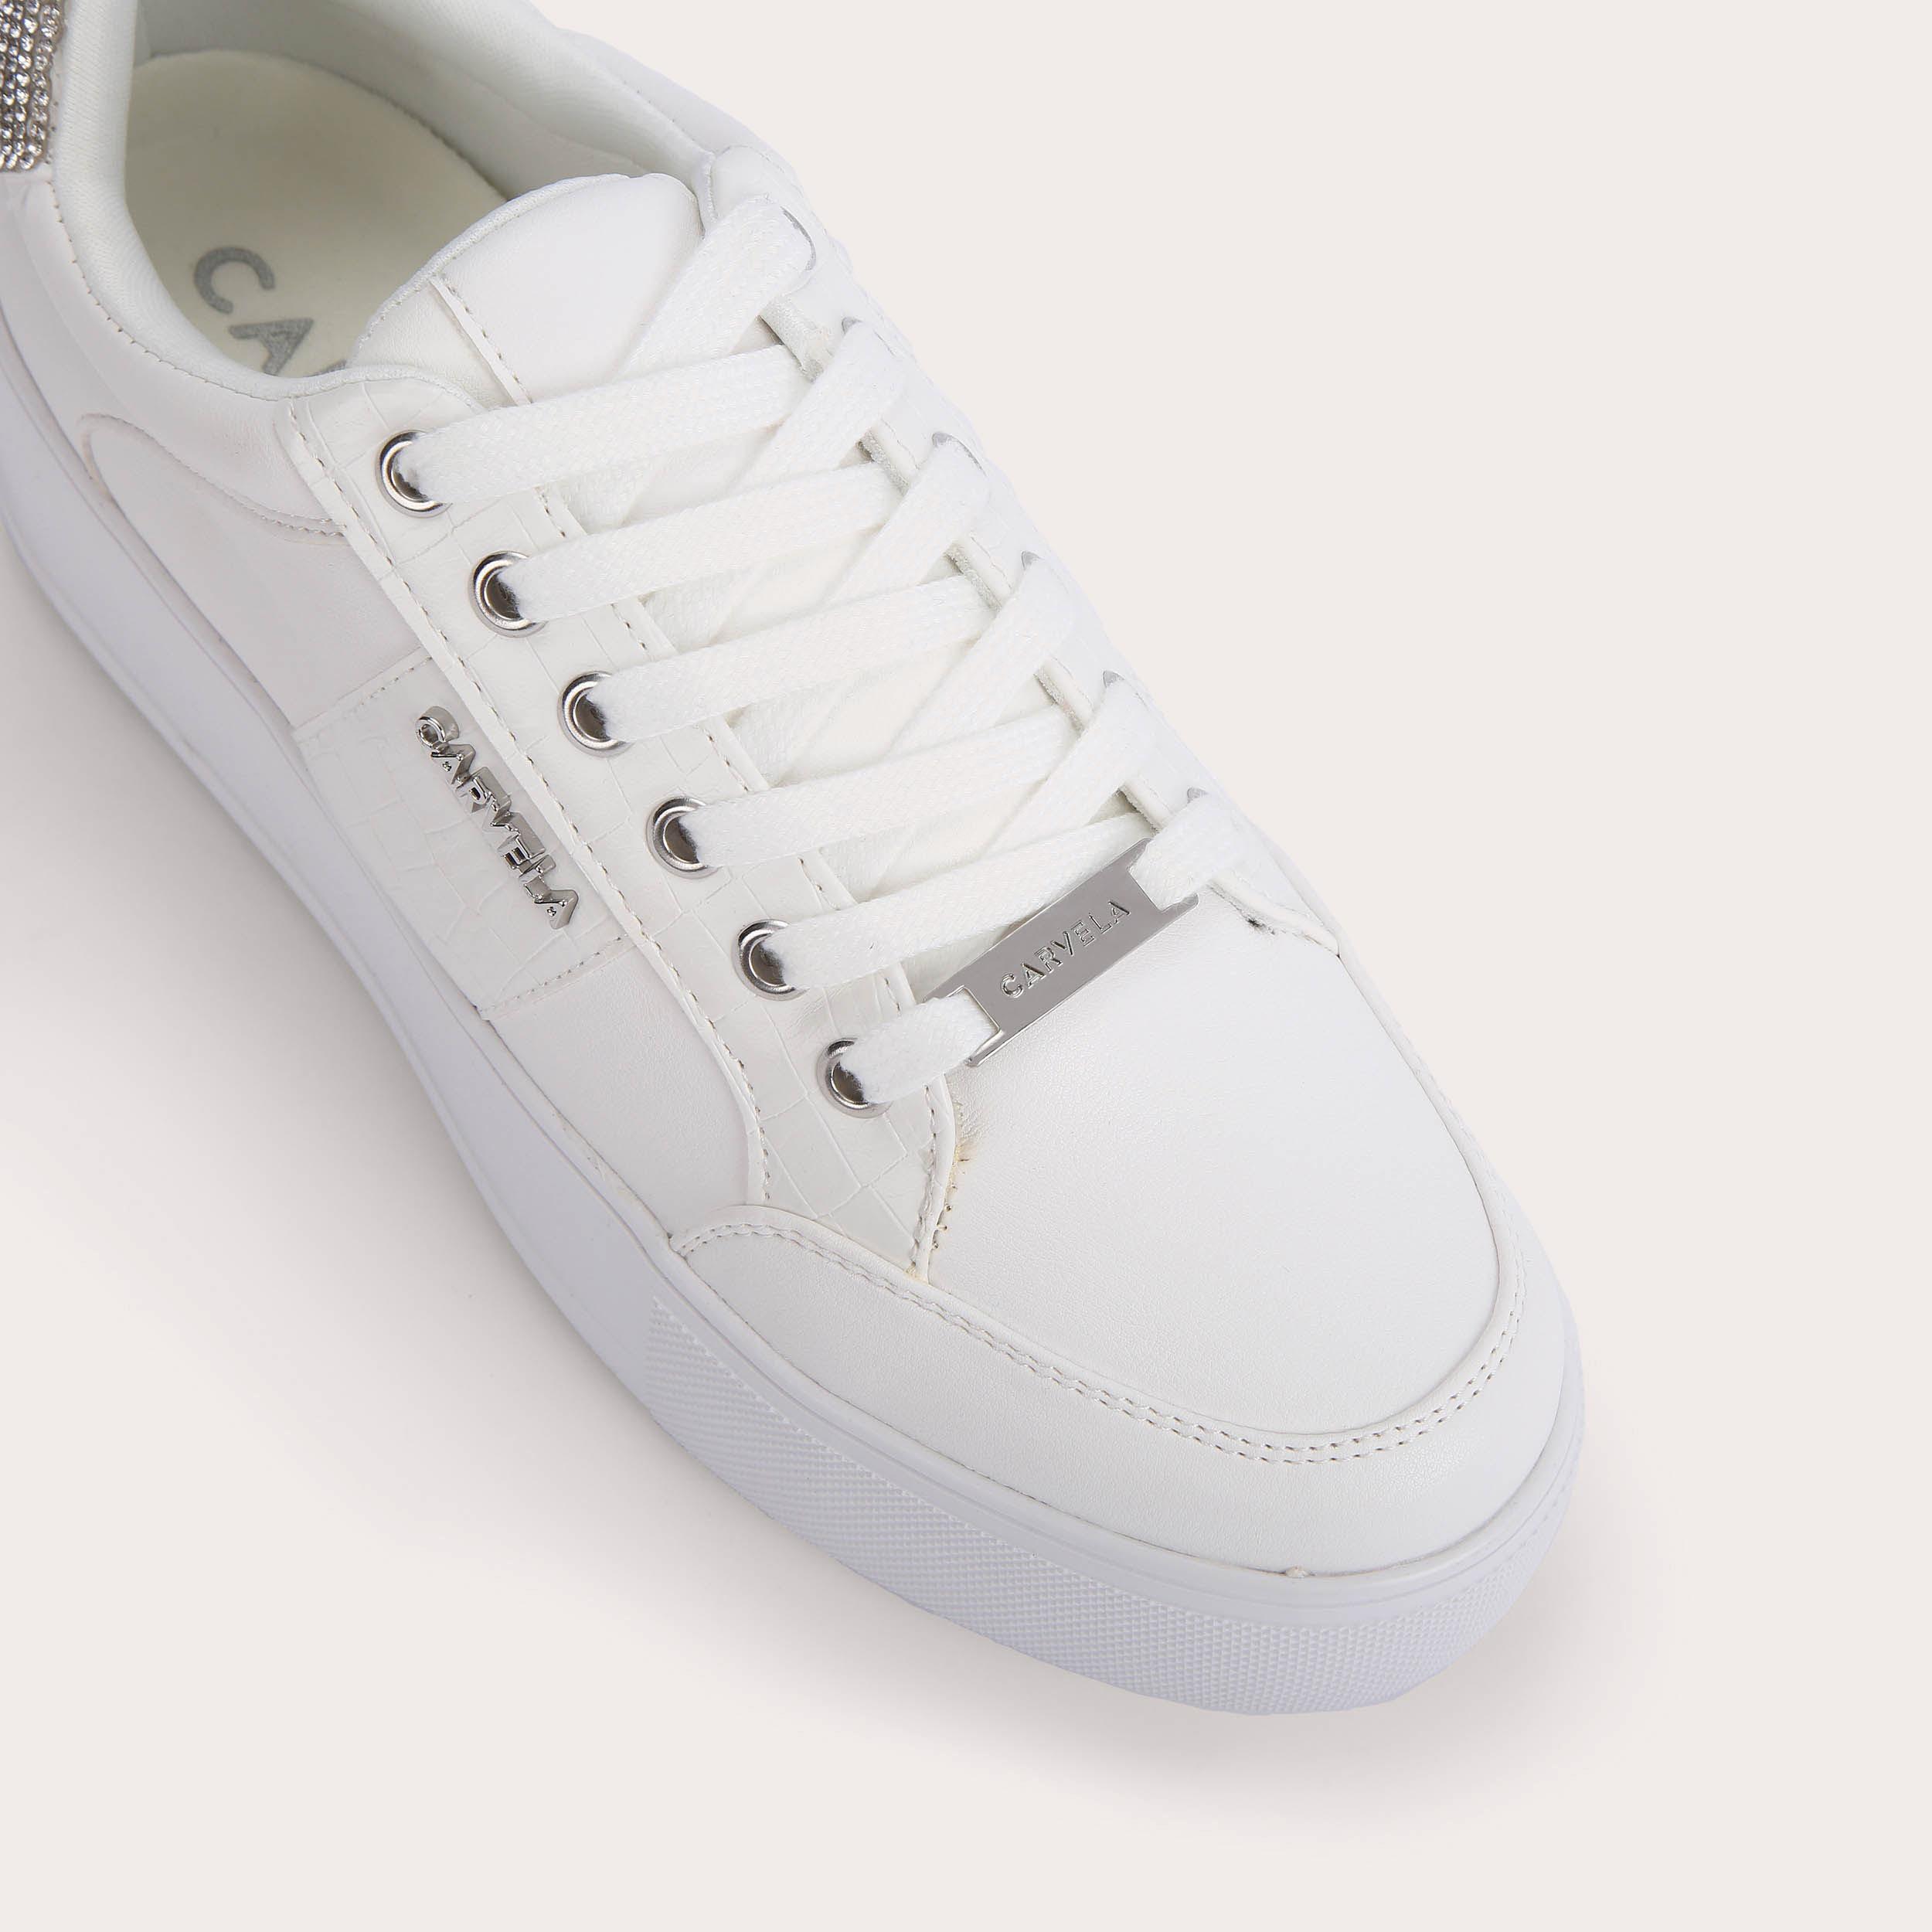 JIVE LACE UP White Lace Up Trainers by CARVELA